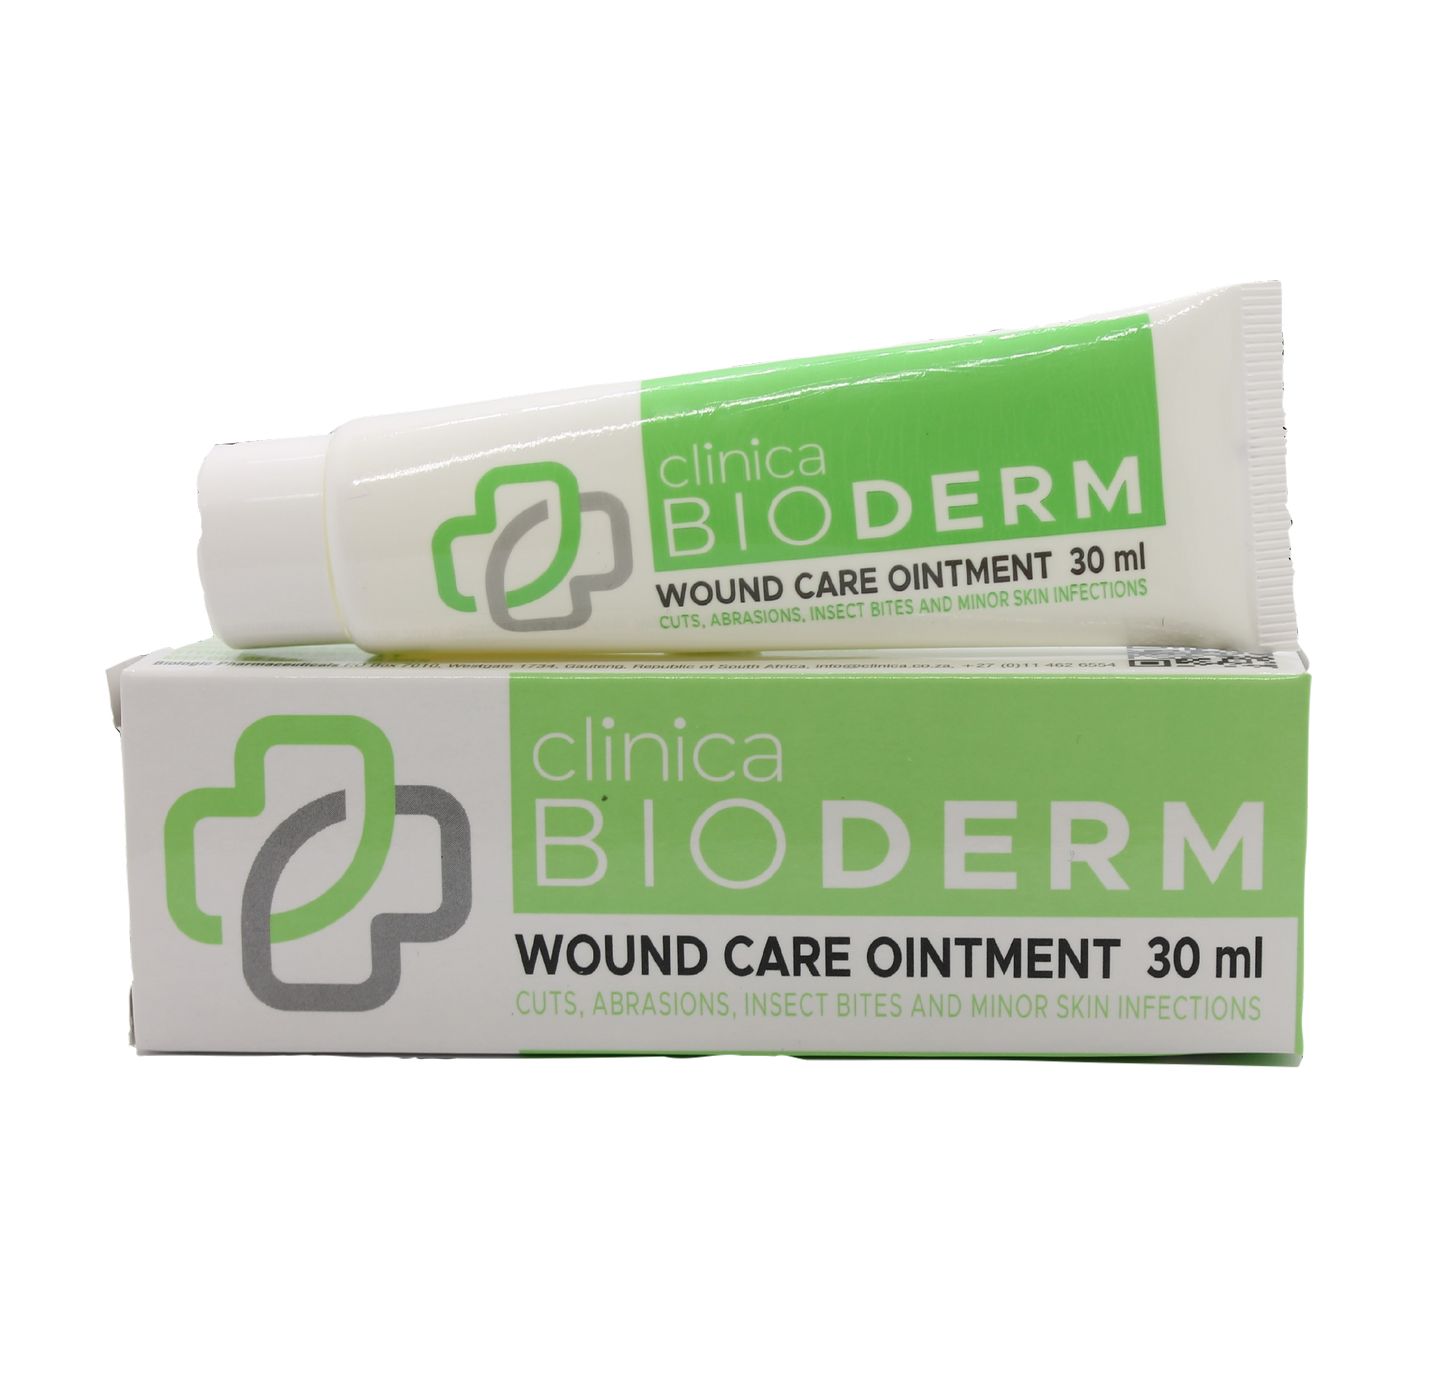 Bioderm Woundcare Ointment 30g